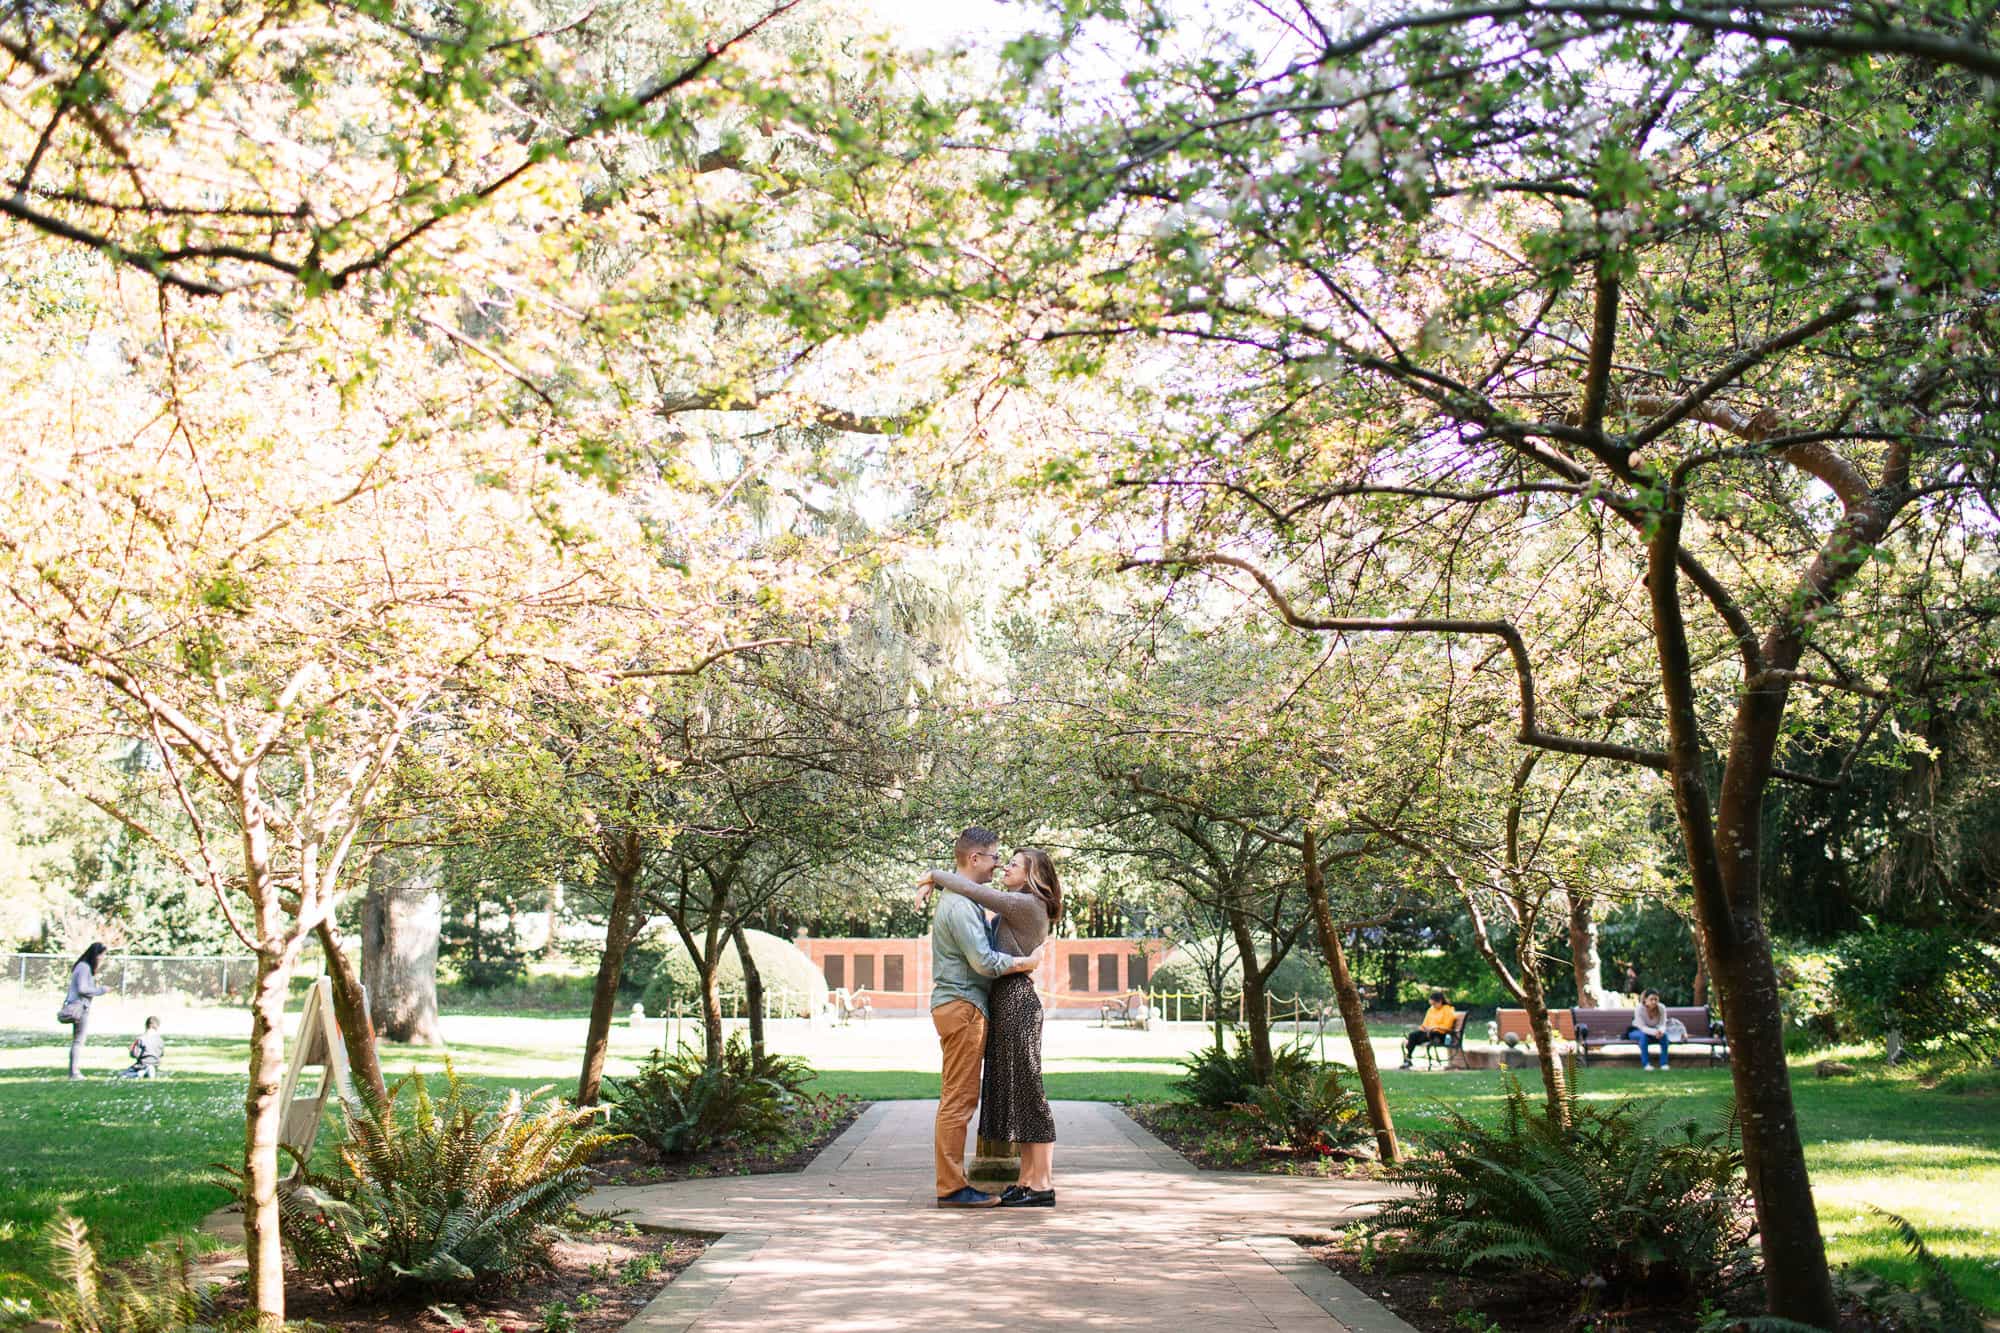 Engaged couple hugging underneath trees in a lush garden